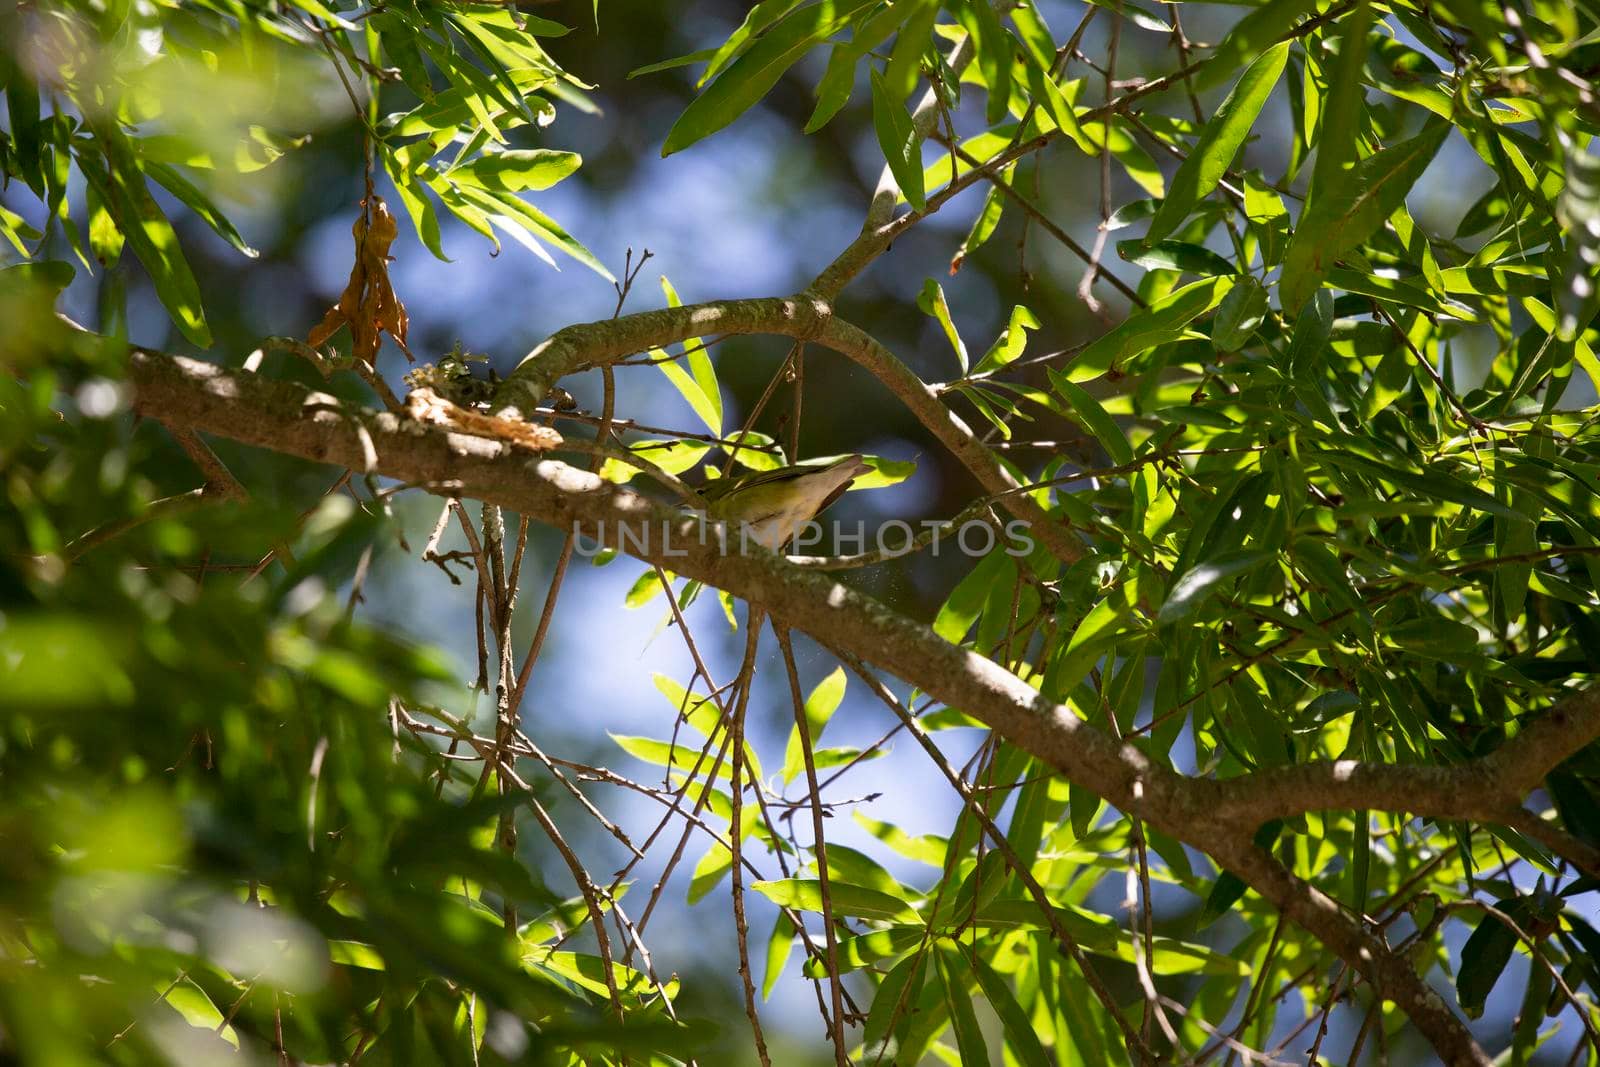 Immature Tennessee warbler (Leiothlypis peregrina) looking out from its perch on a tree limb